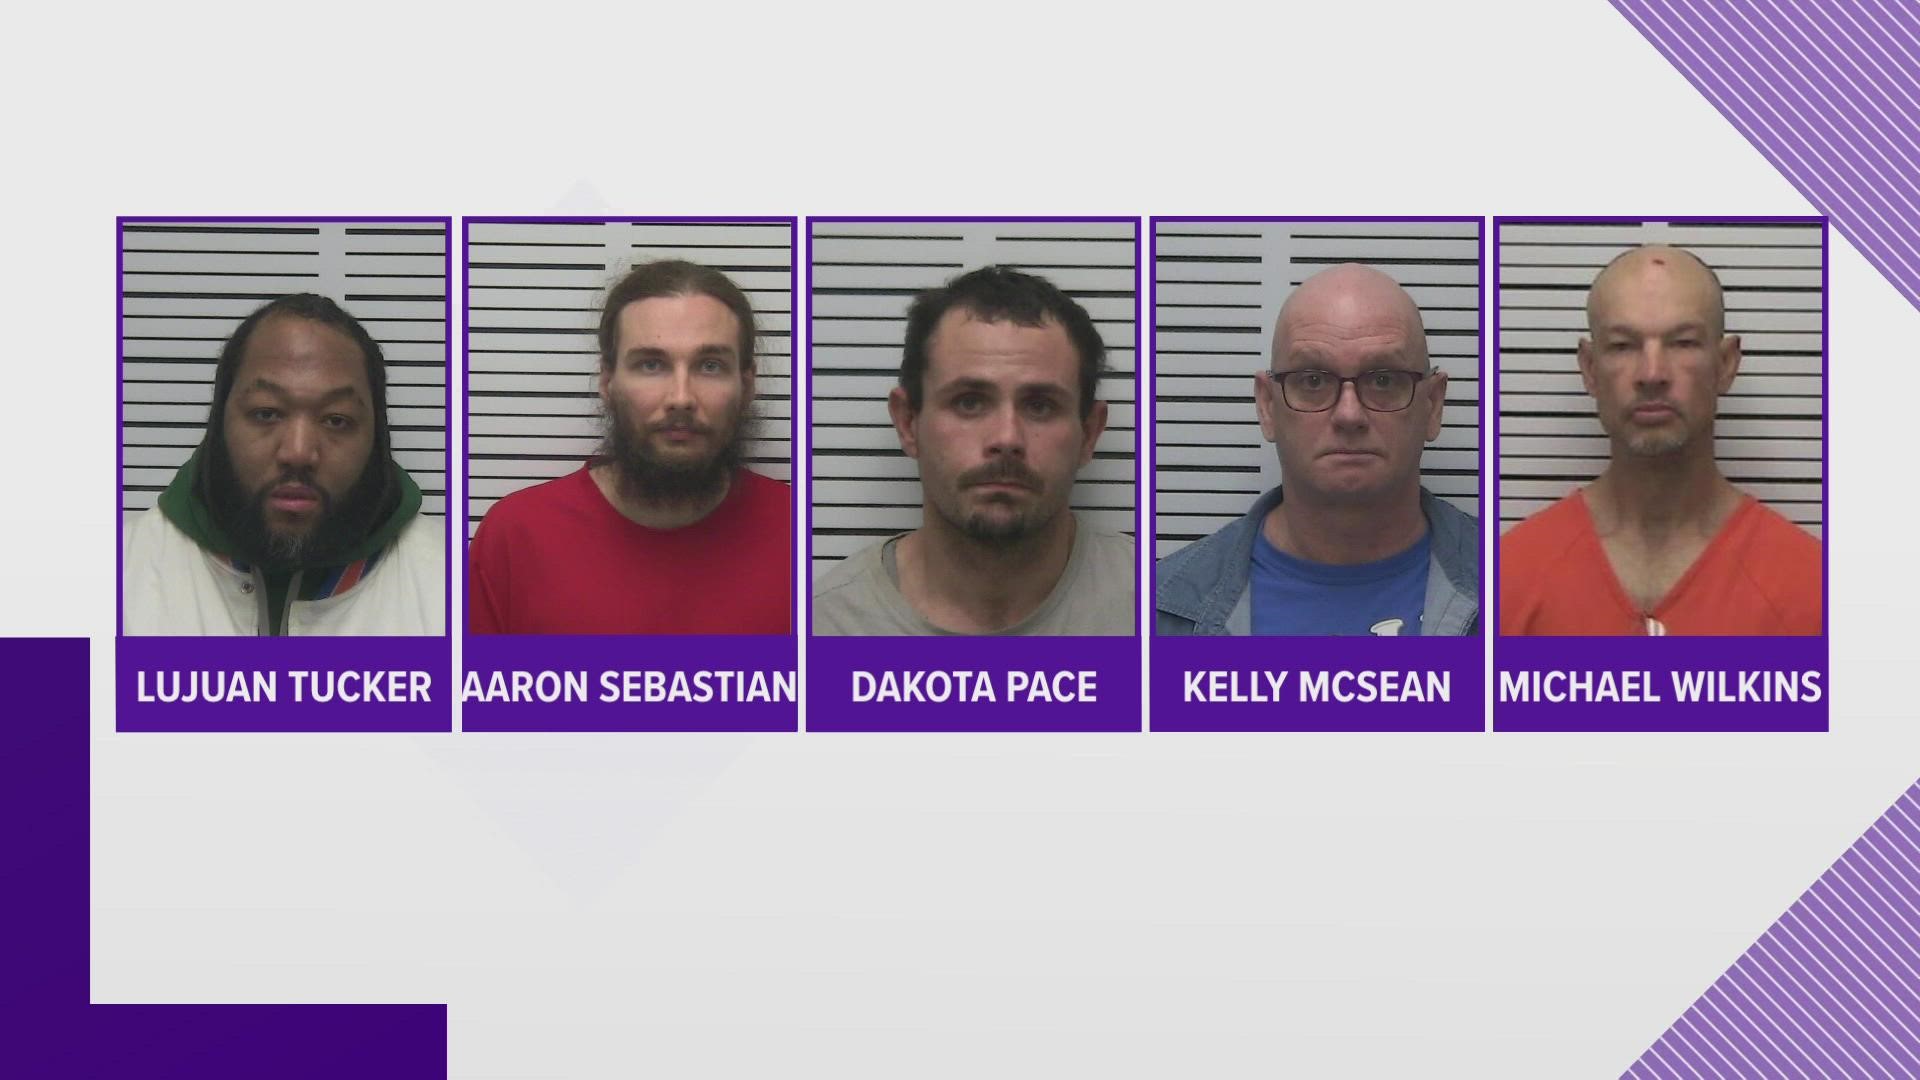 5 inmates escape Tuesday night from St. Francois County Jail in